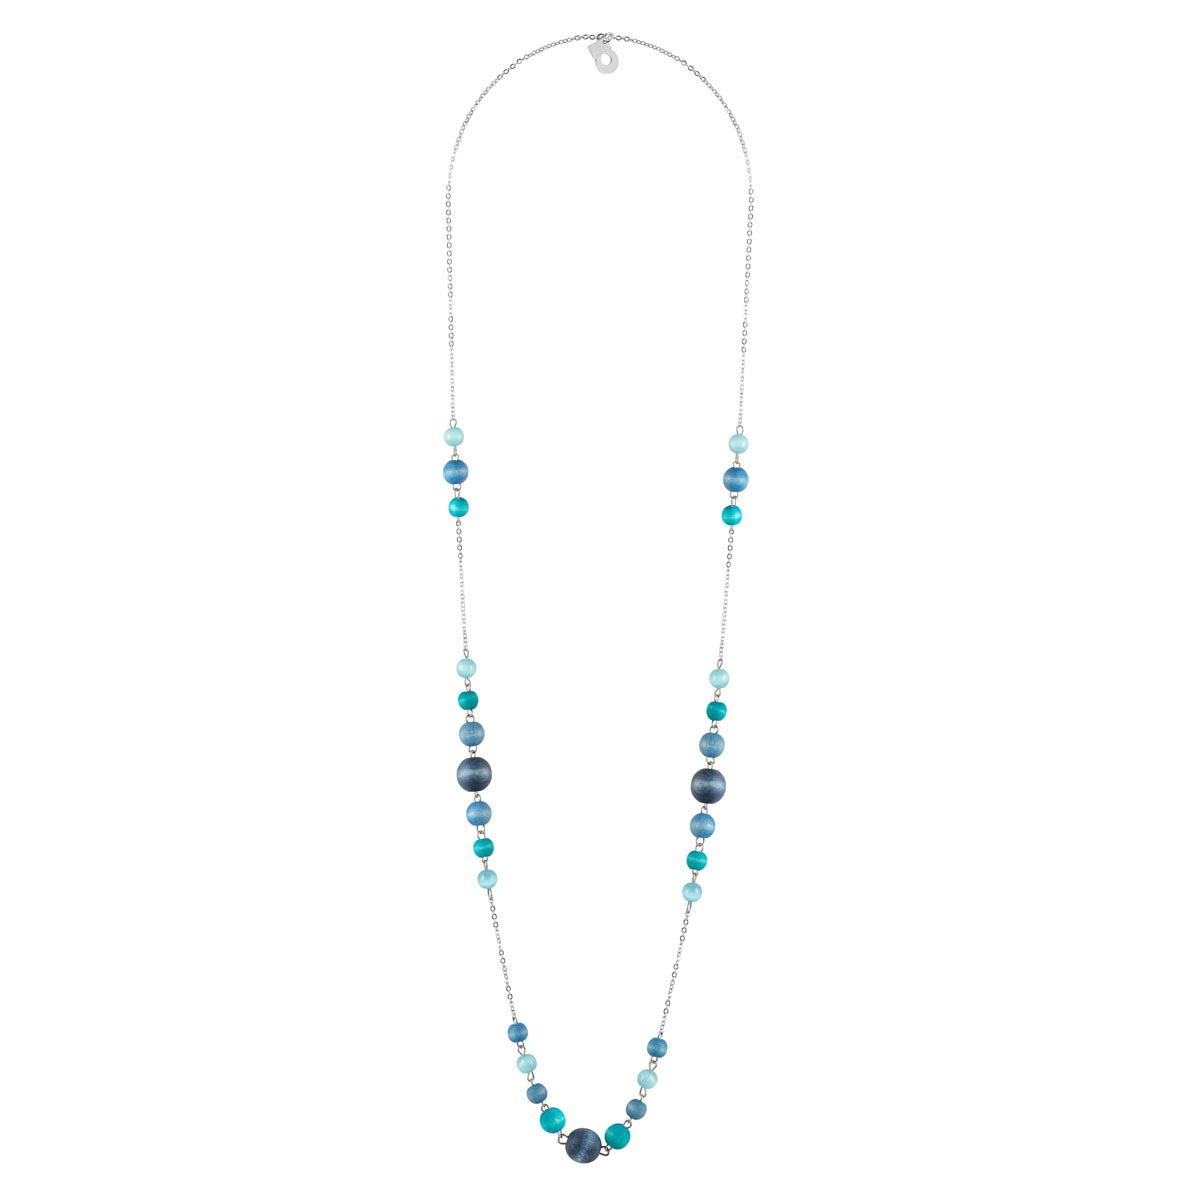 Irene necklace, blue and turquoise